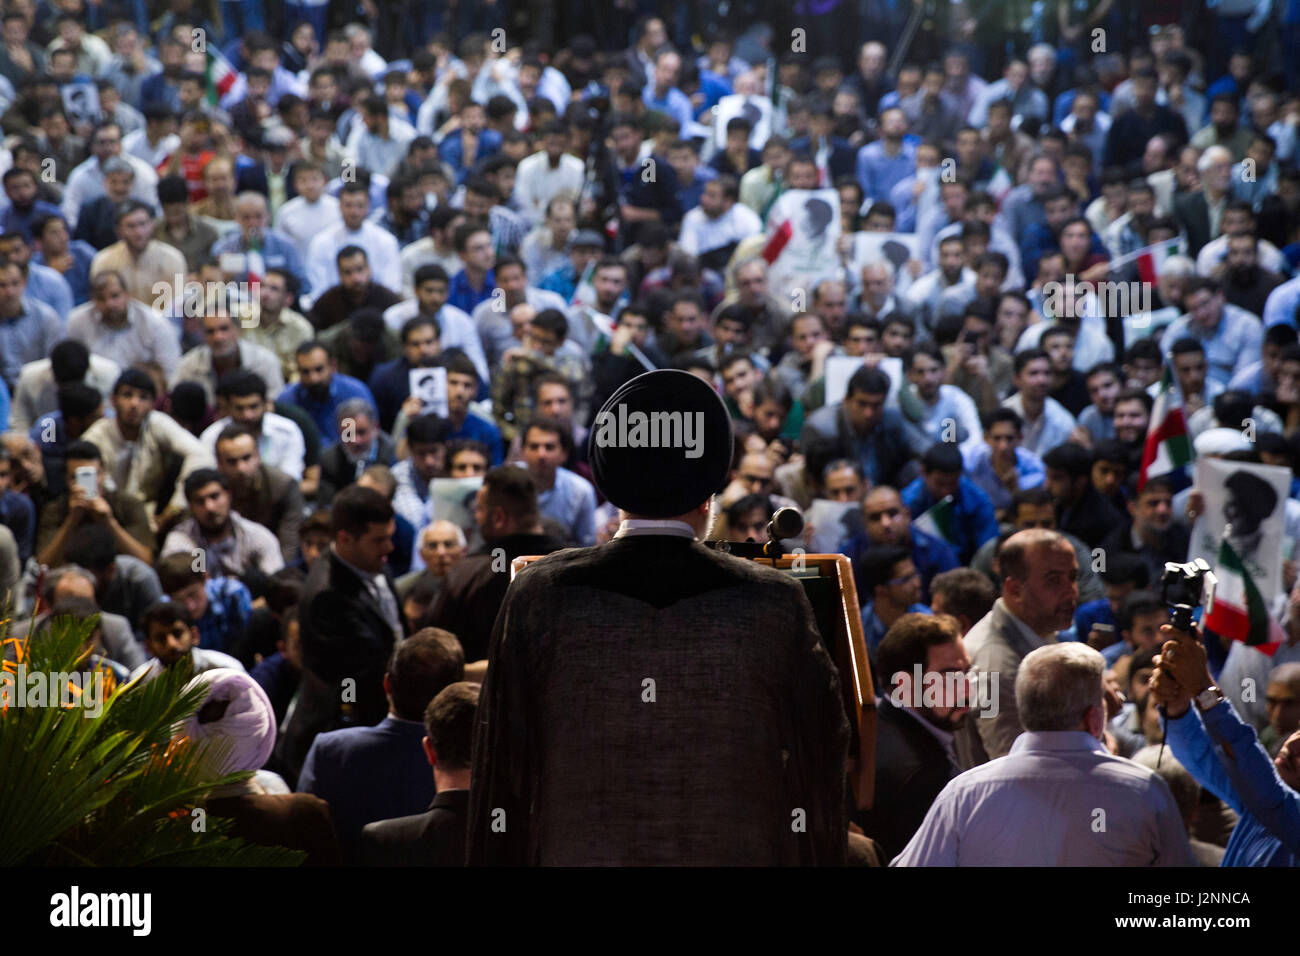 Tehran. 30th Apr, 2017. Supporters listen to the speech of presidential candidate Ebrahim Raisi during a campaign rally in Tehran, Iran, April 29, 2017. Iran's 12th presidential election is slated for May 19. Credit: Xinhua/Alamy Live News Stock Photo